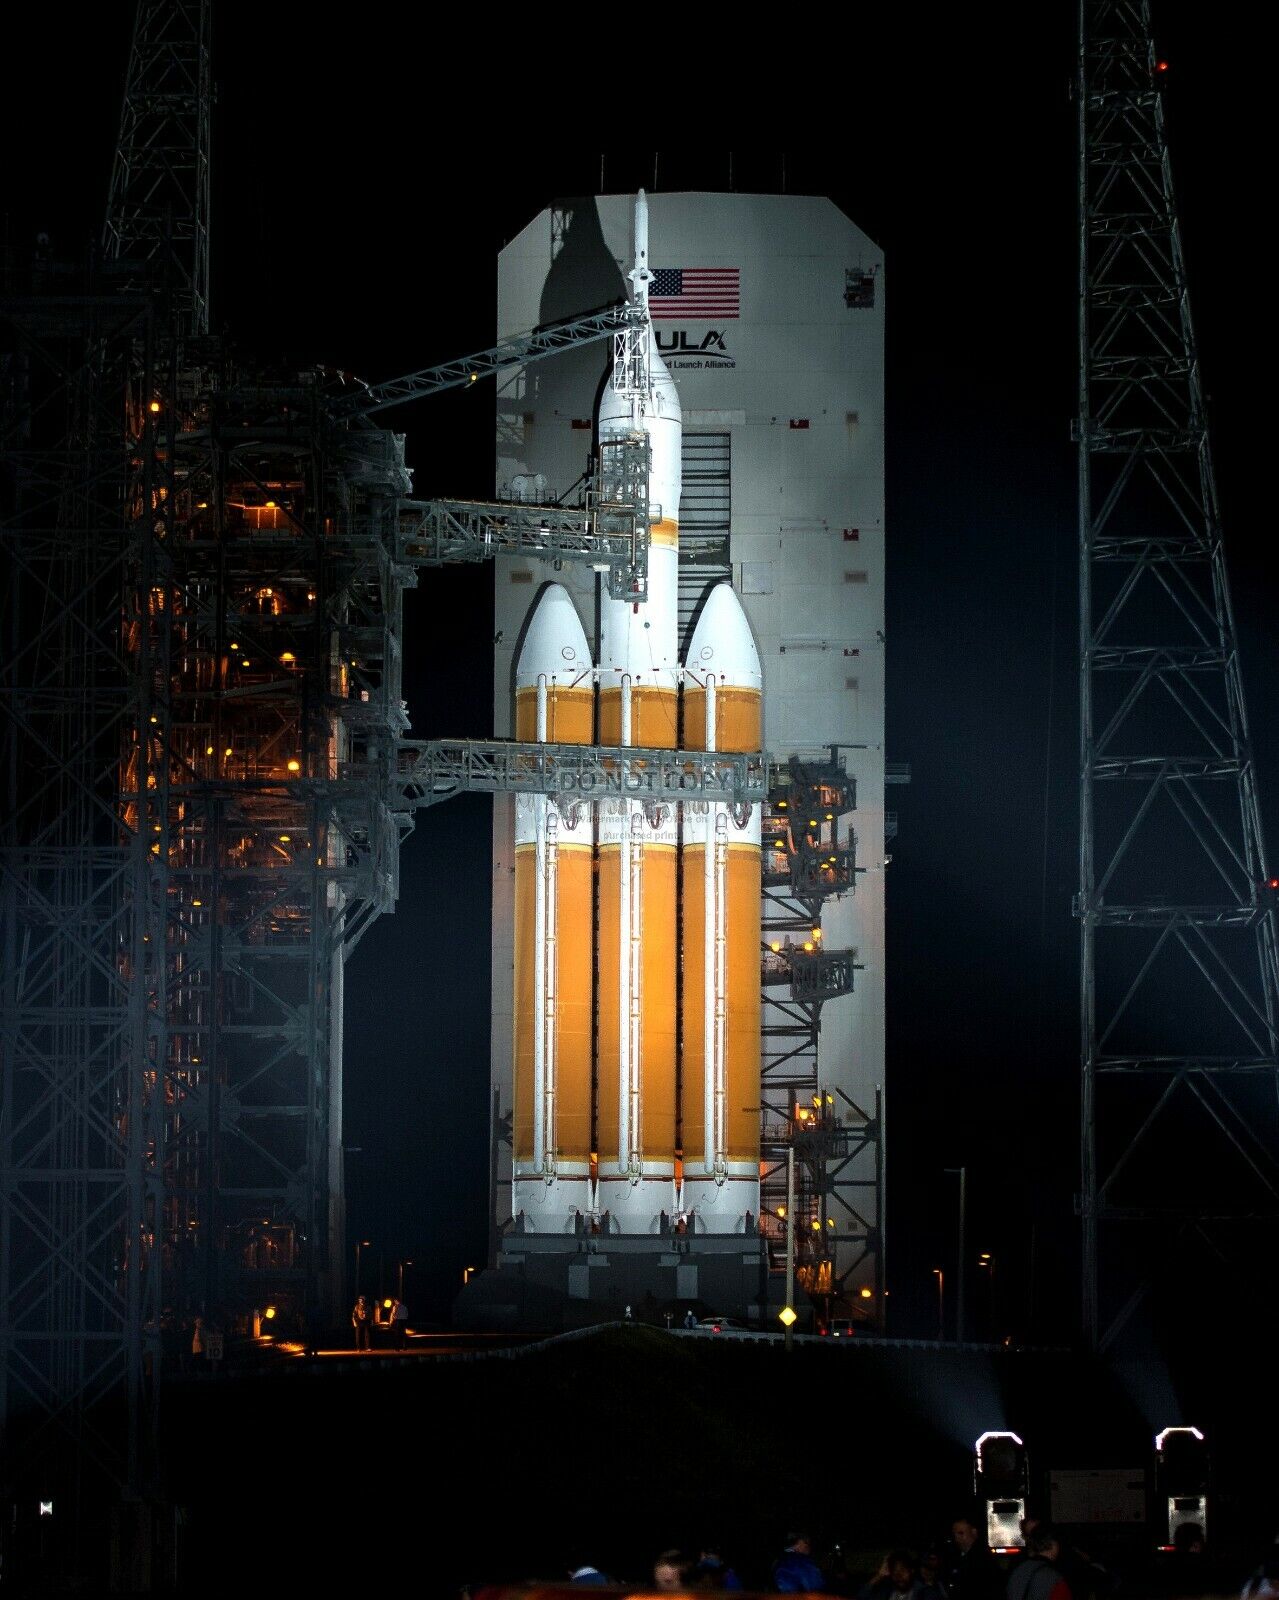 DELTA IV ROCKET WITH ORION SPACECRAFT MOUNTED ATOP - 8X10 NASA PHOTO (BB-156)